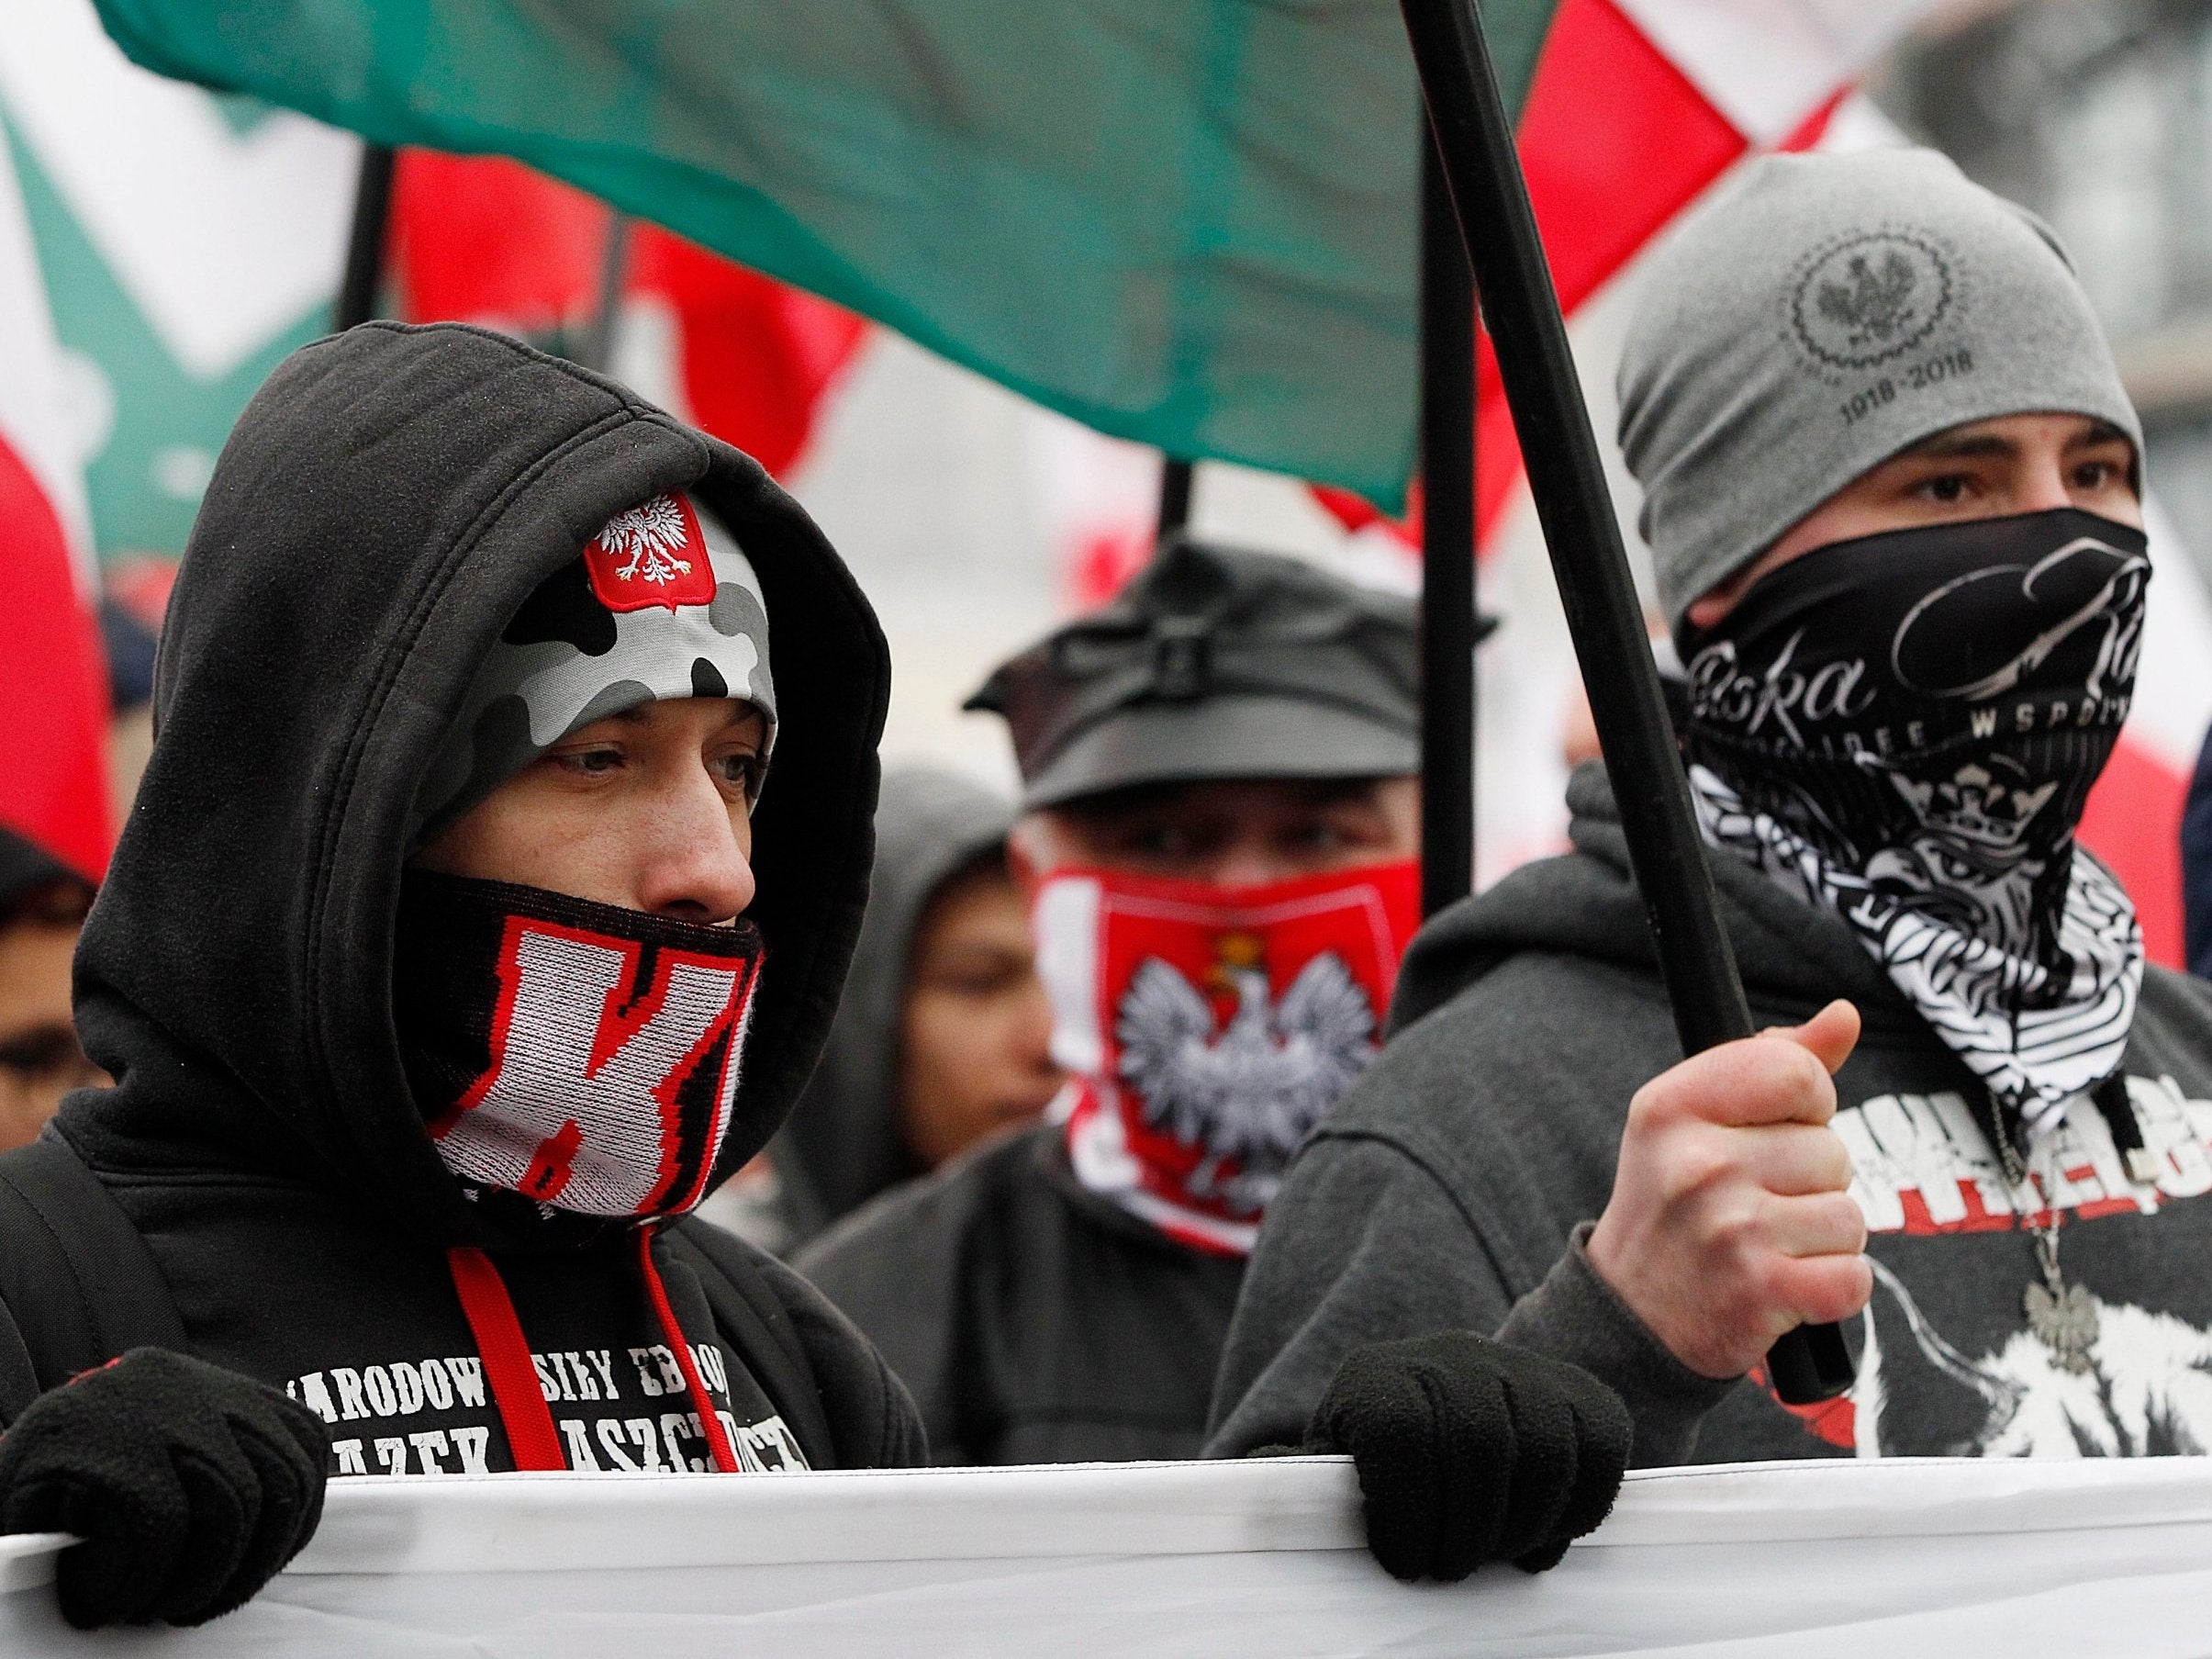 Masked members of radical right-wing groups wave flags at independence march